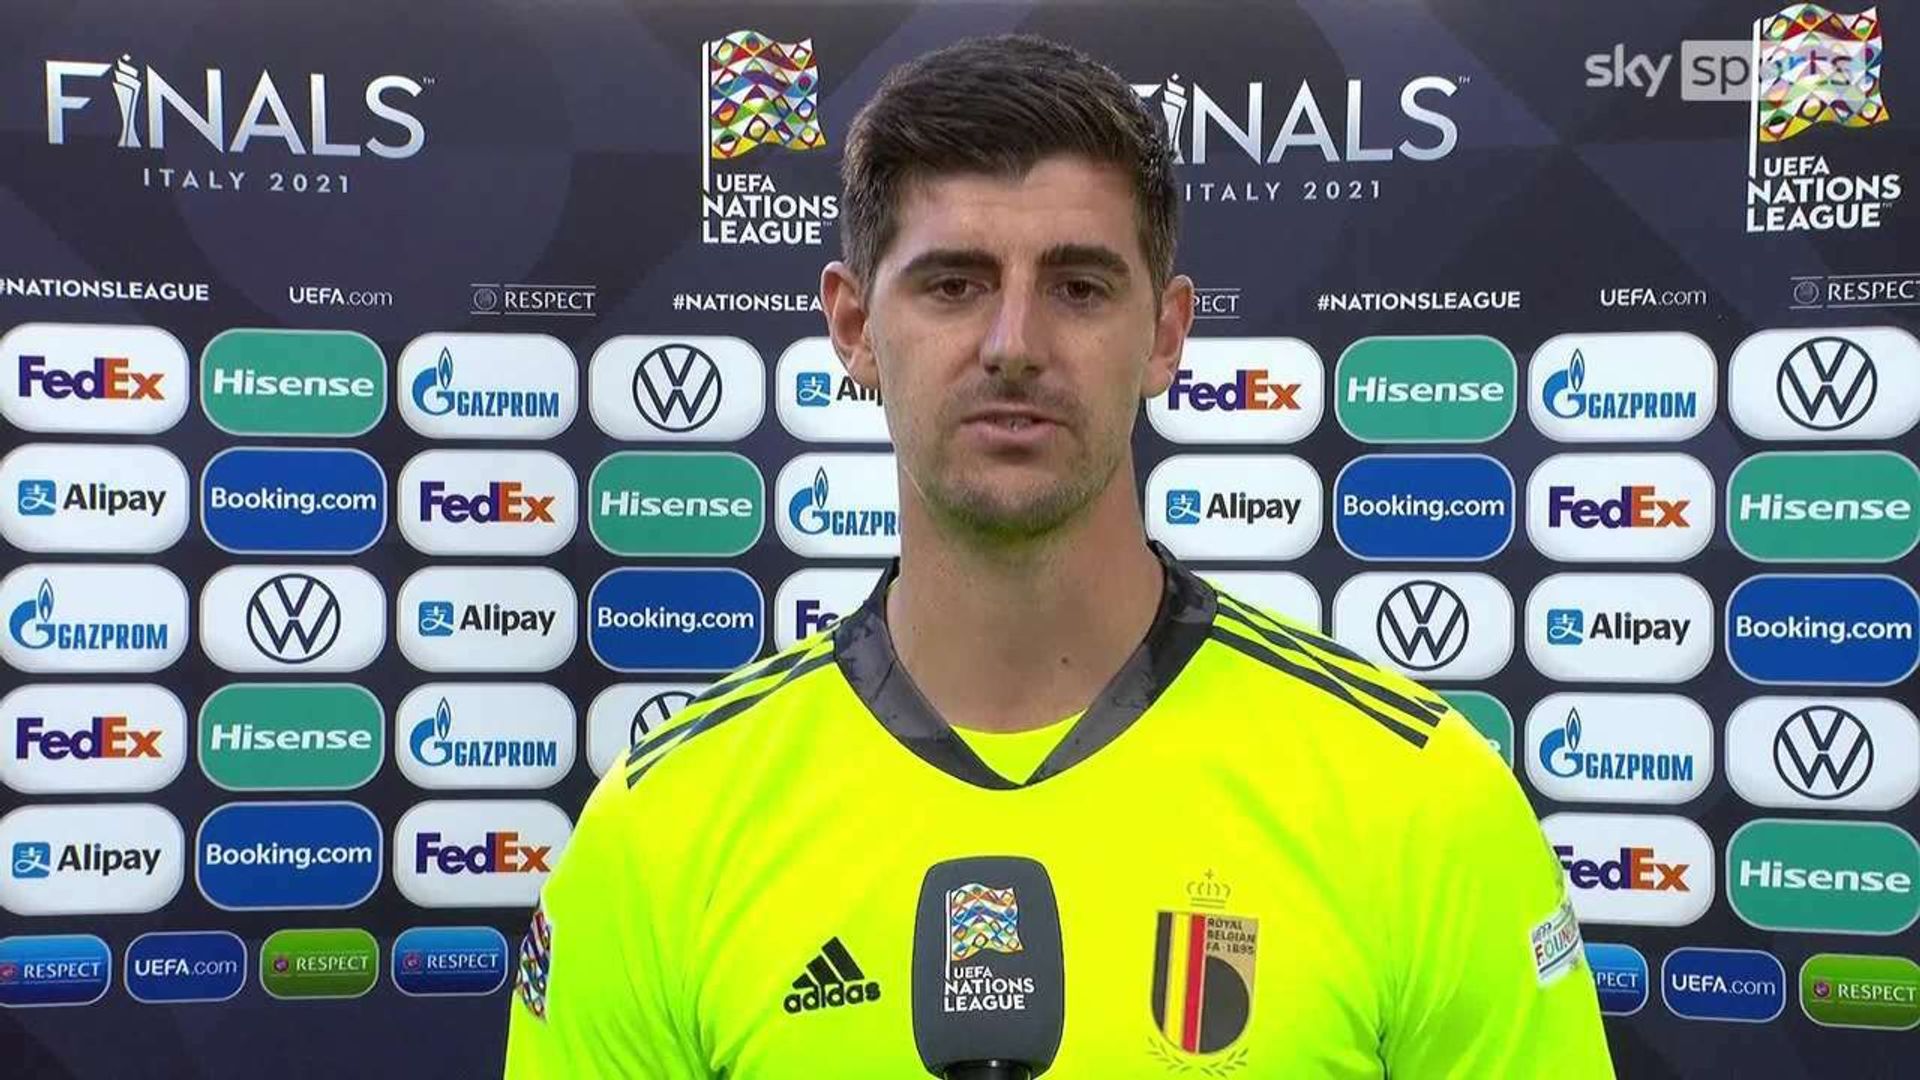 'We are not robots!' - Courtois critical of football authorities